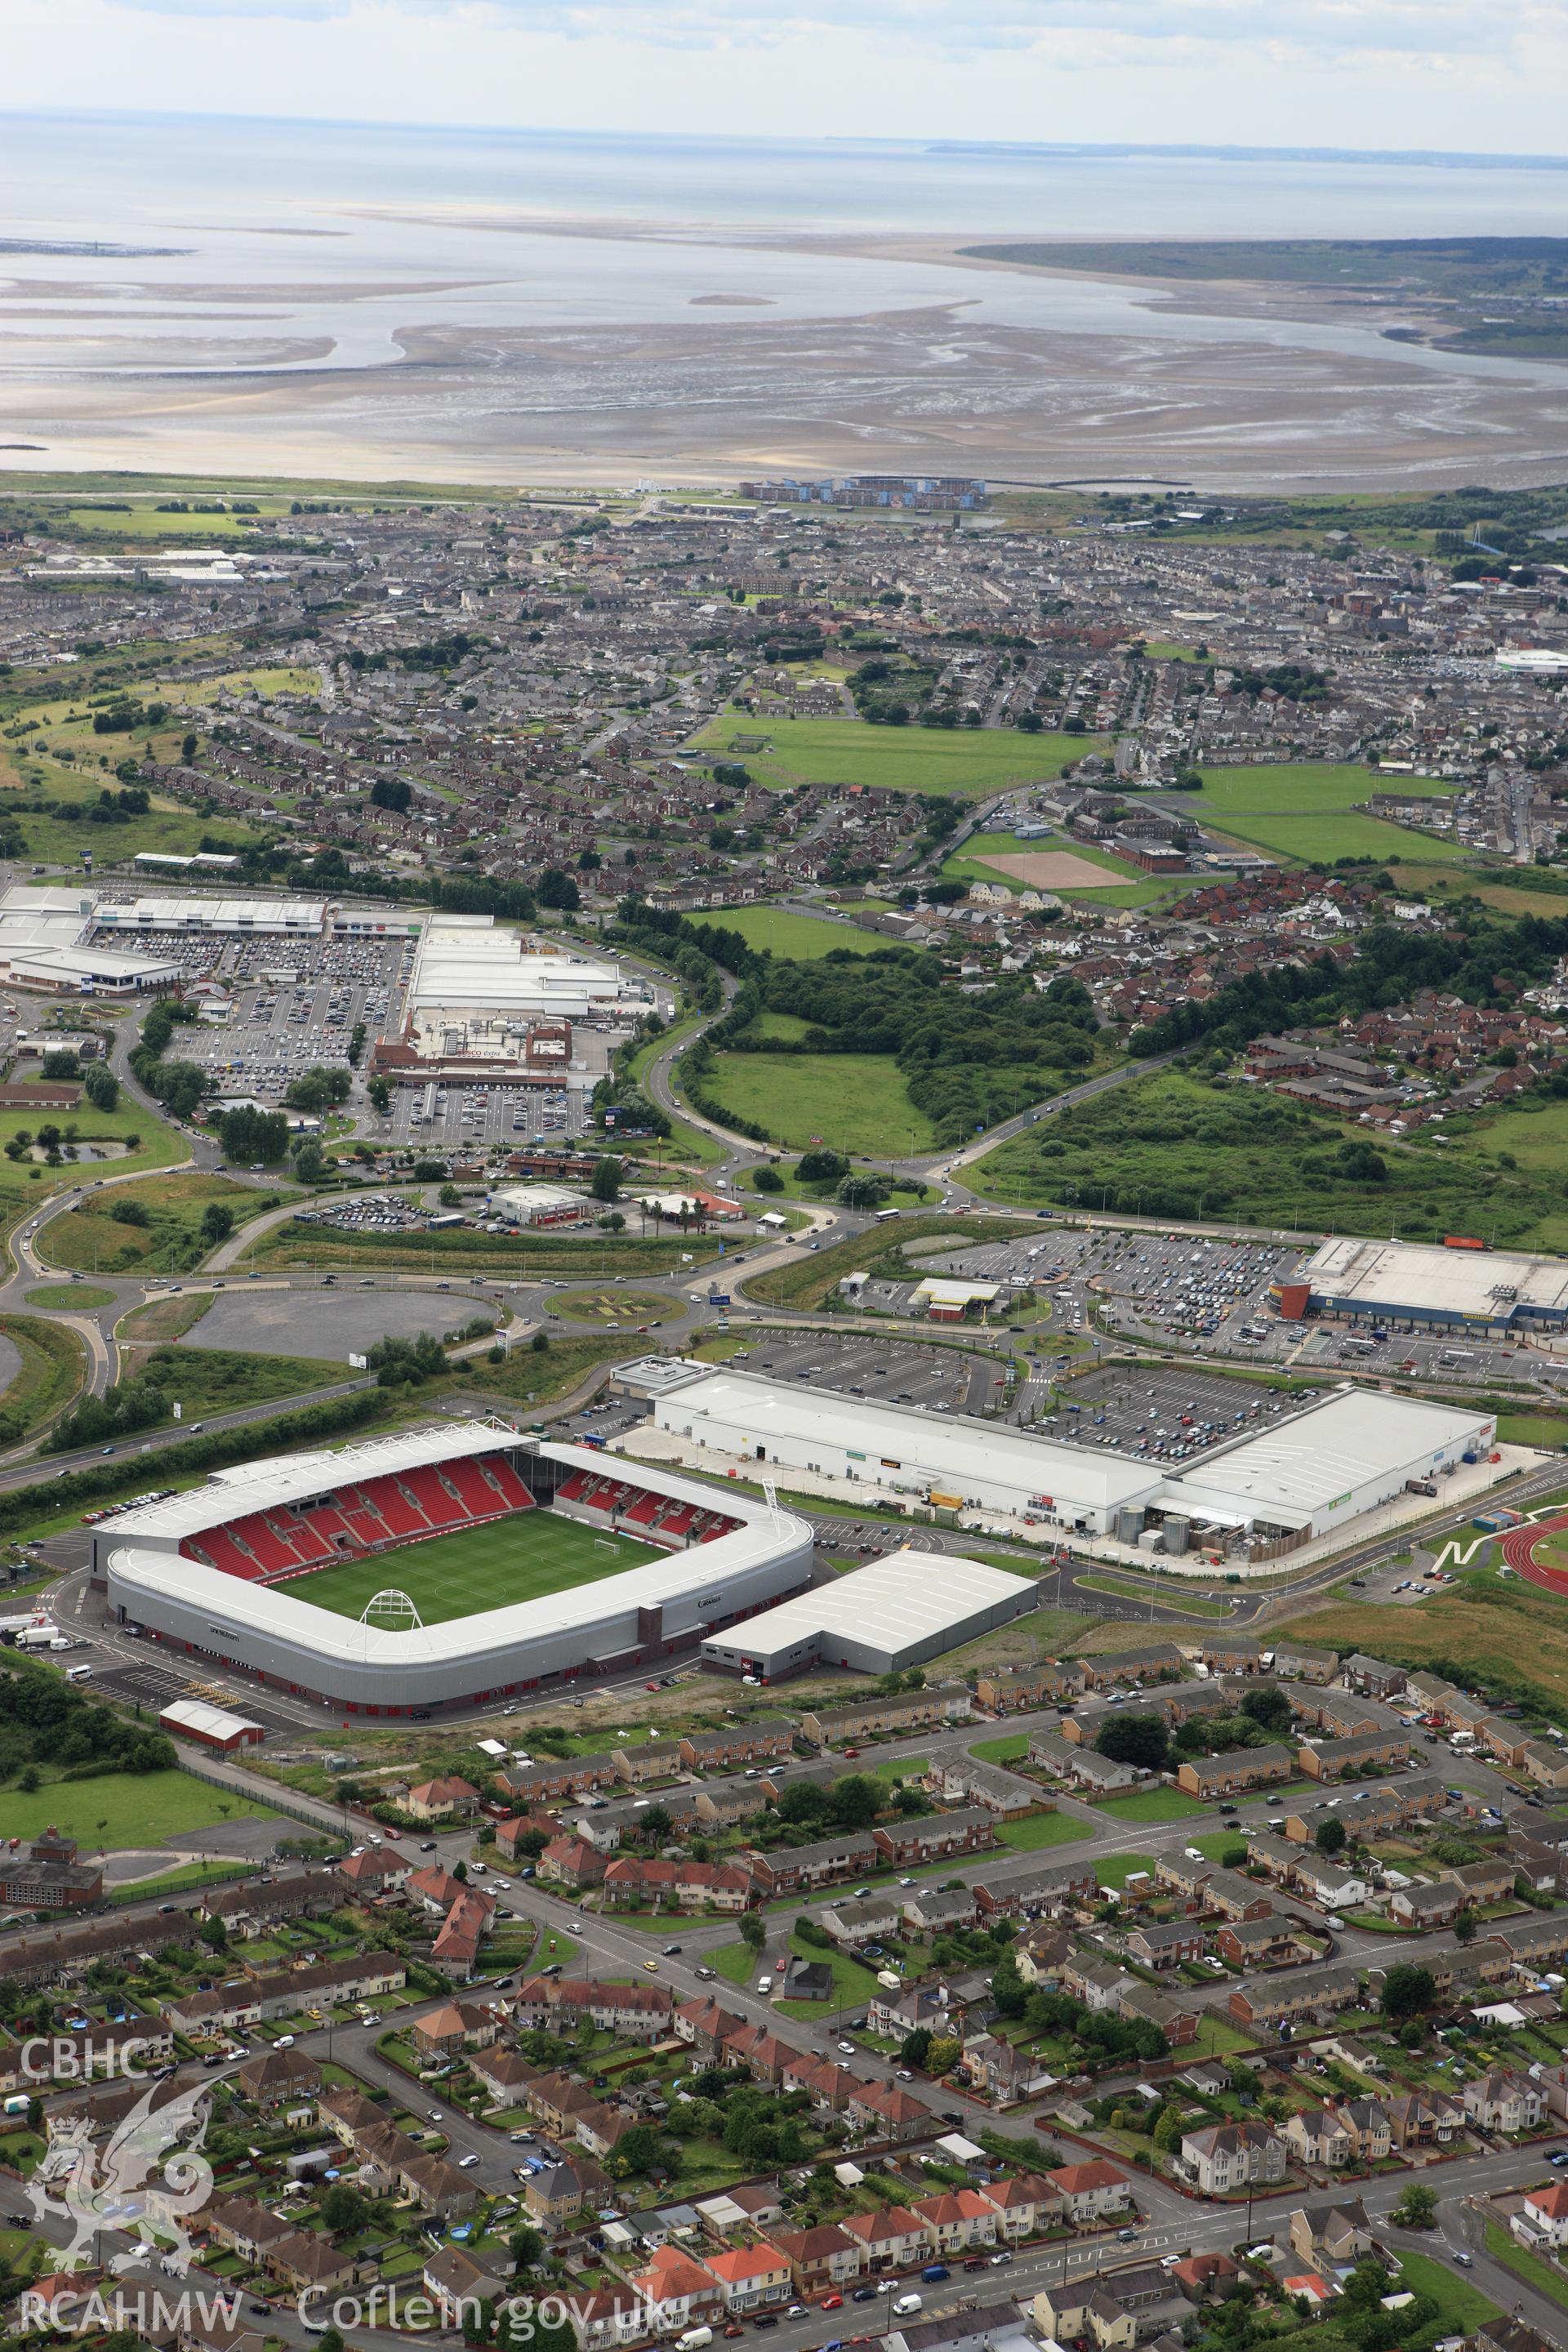 RCAHMW colour oblique aerial photograph of Parc-y-Scarlets Stadium, Llanelli. Taken on 09 July 2009 by Toby Driver